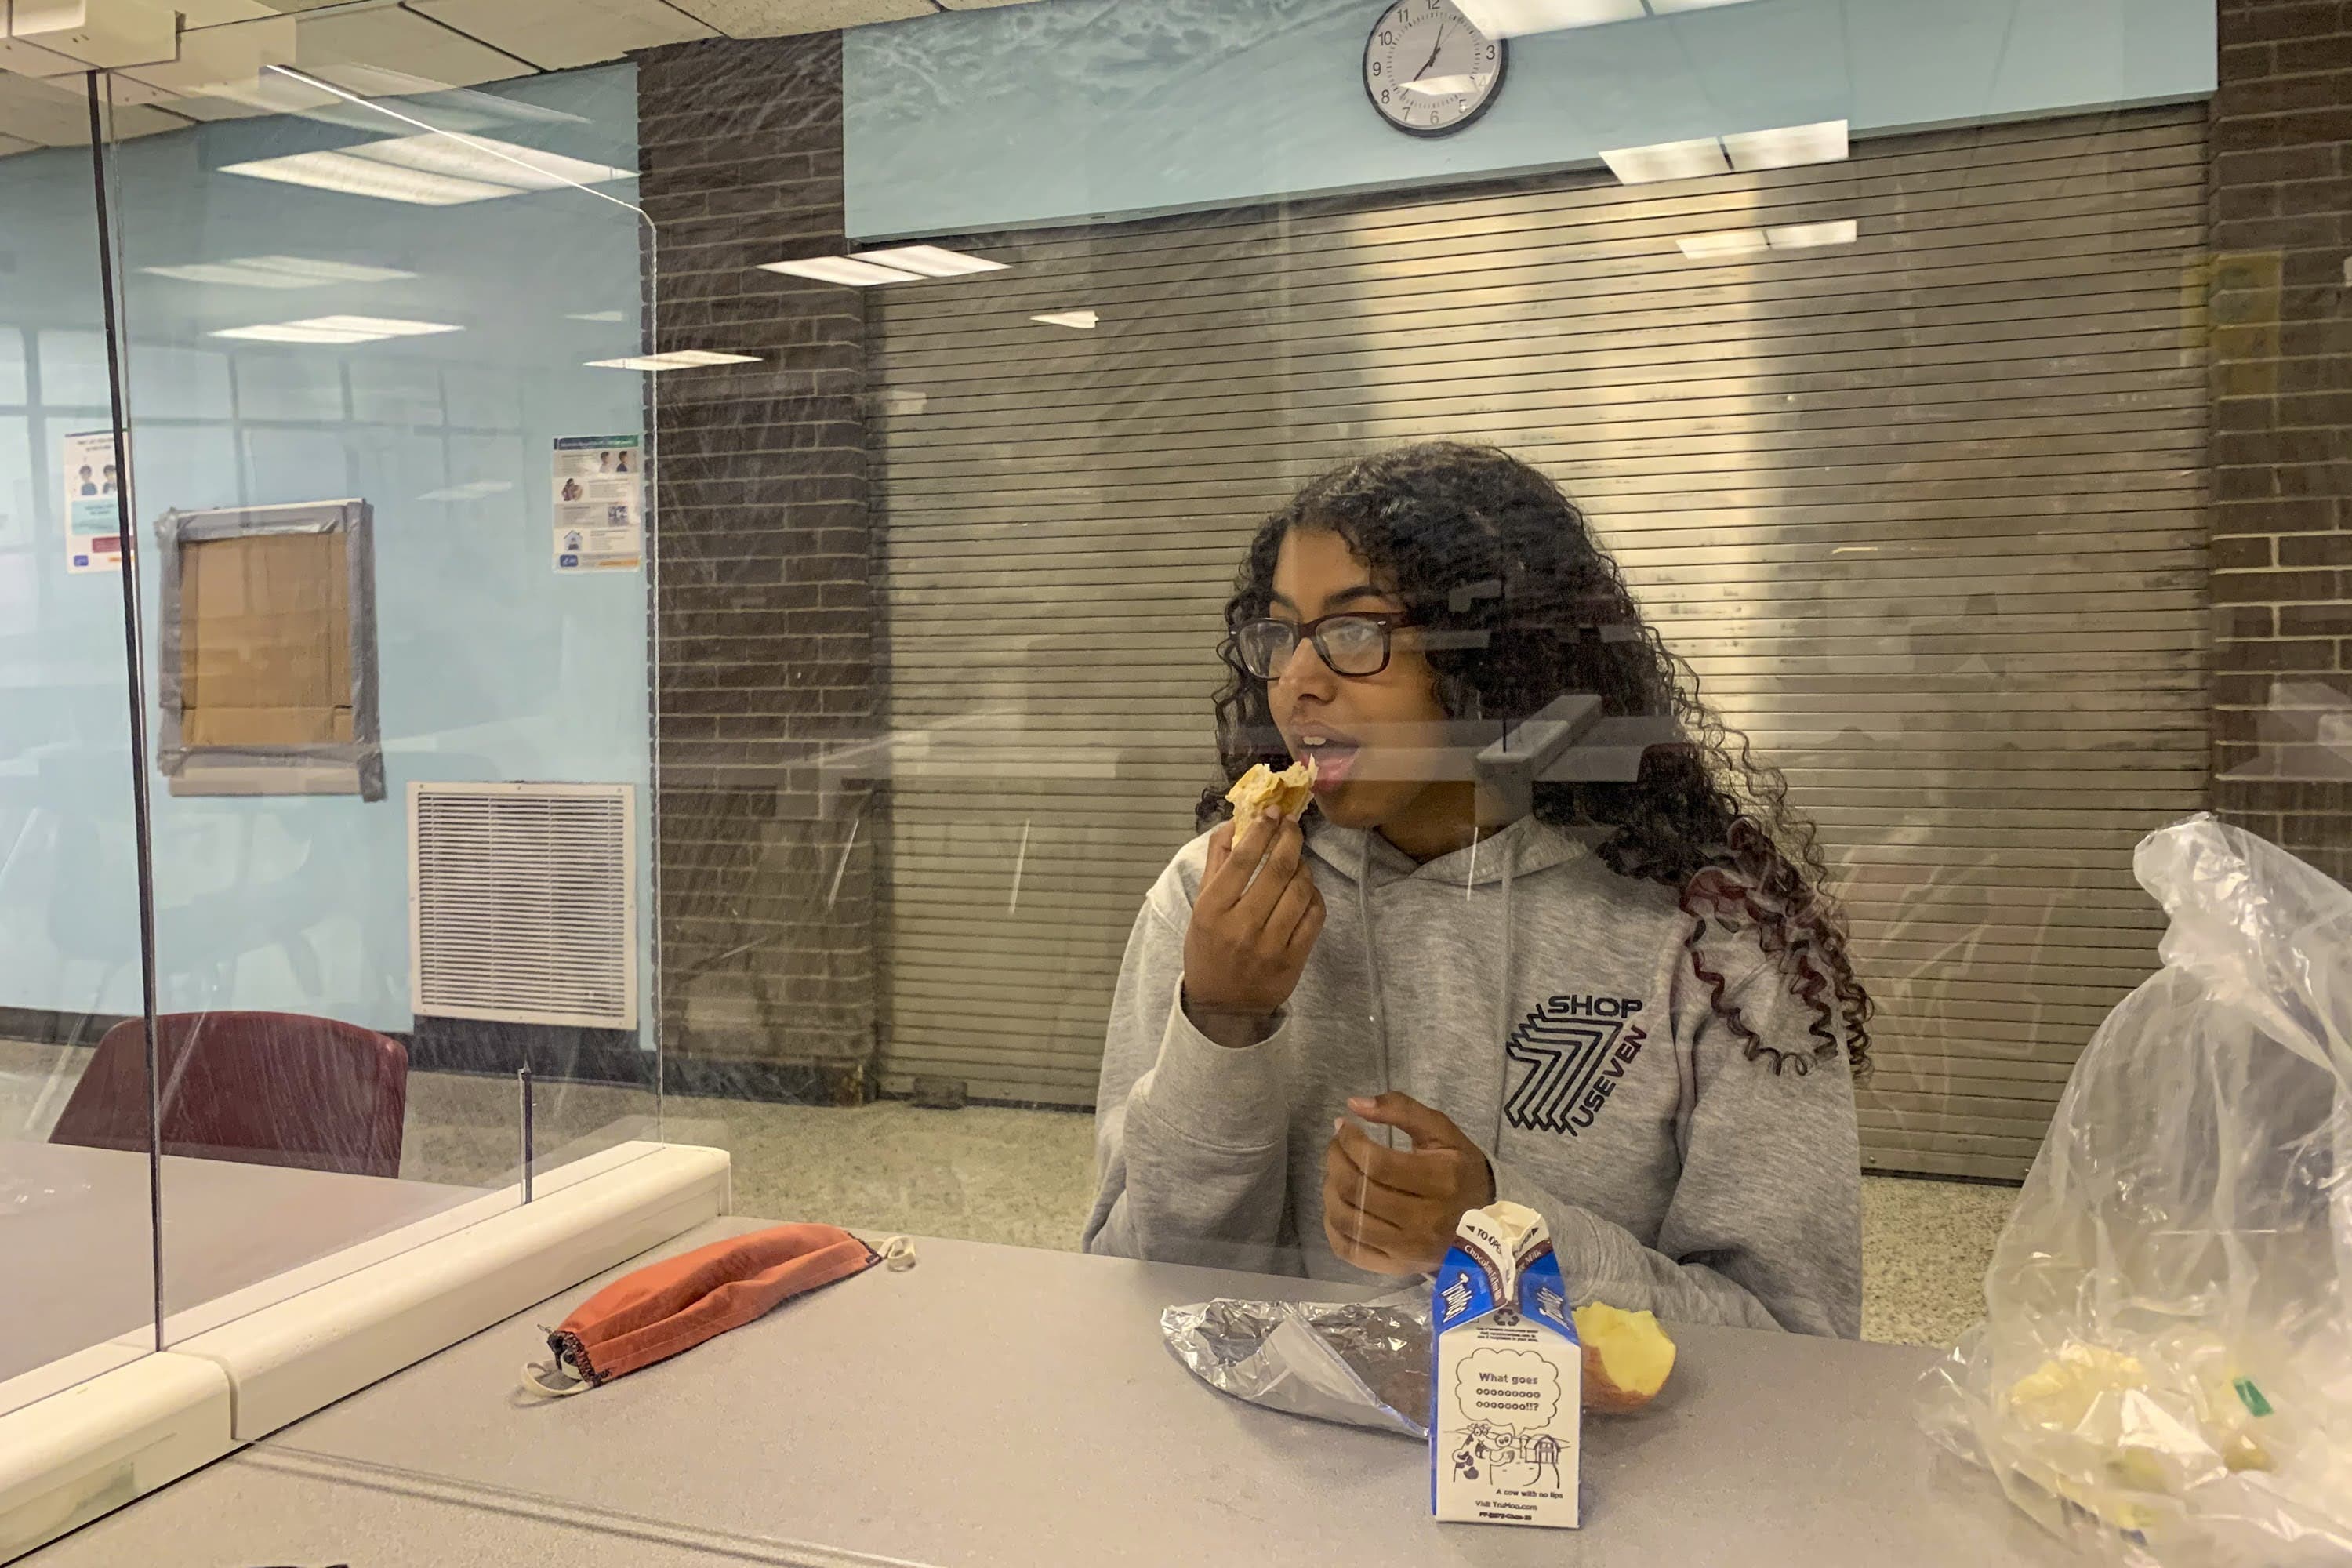 Senior Jessica Brito eats lunch while separated from her classmates by plexiglass. The barrier allows students to take their masks off to eat. (Courtesy Maxine DeJesus)